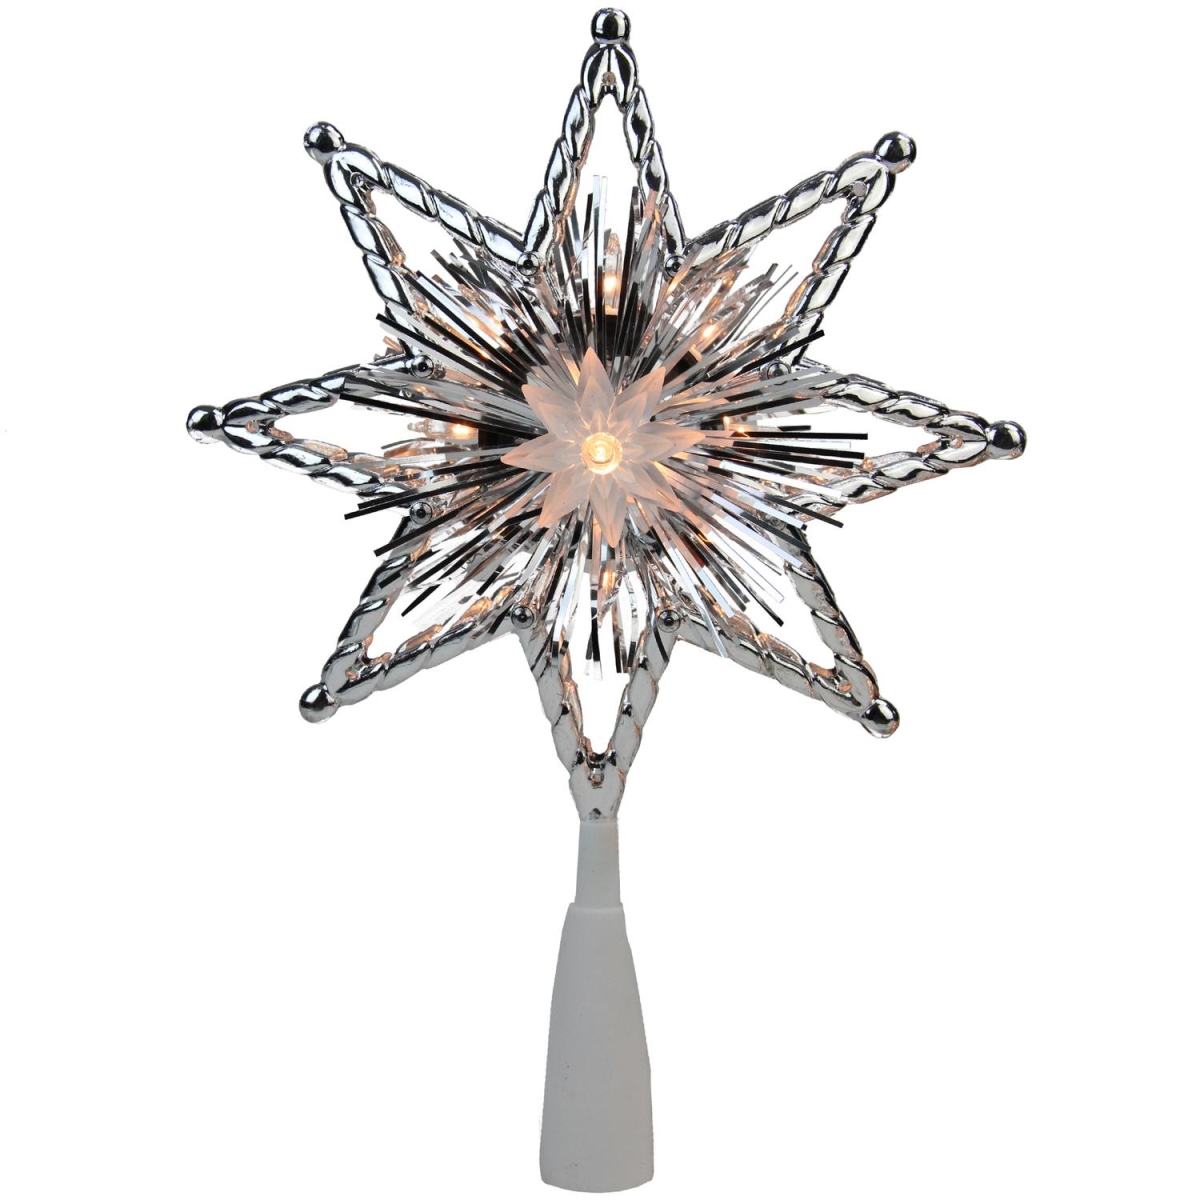 Picture of Northlight 32606356 8 in. Retro Silver Tinsel 8-Point Star Christmas Tree Topper - Clear Lights